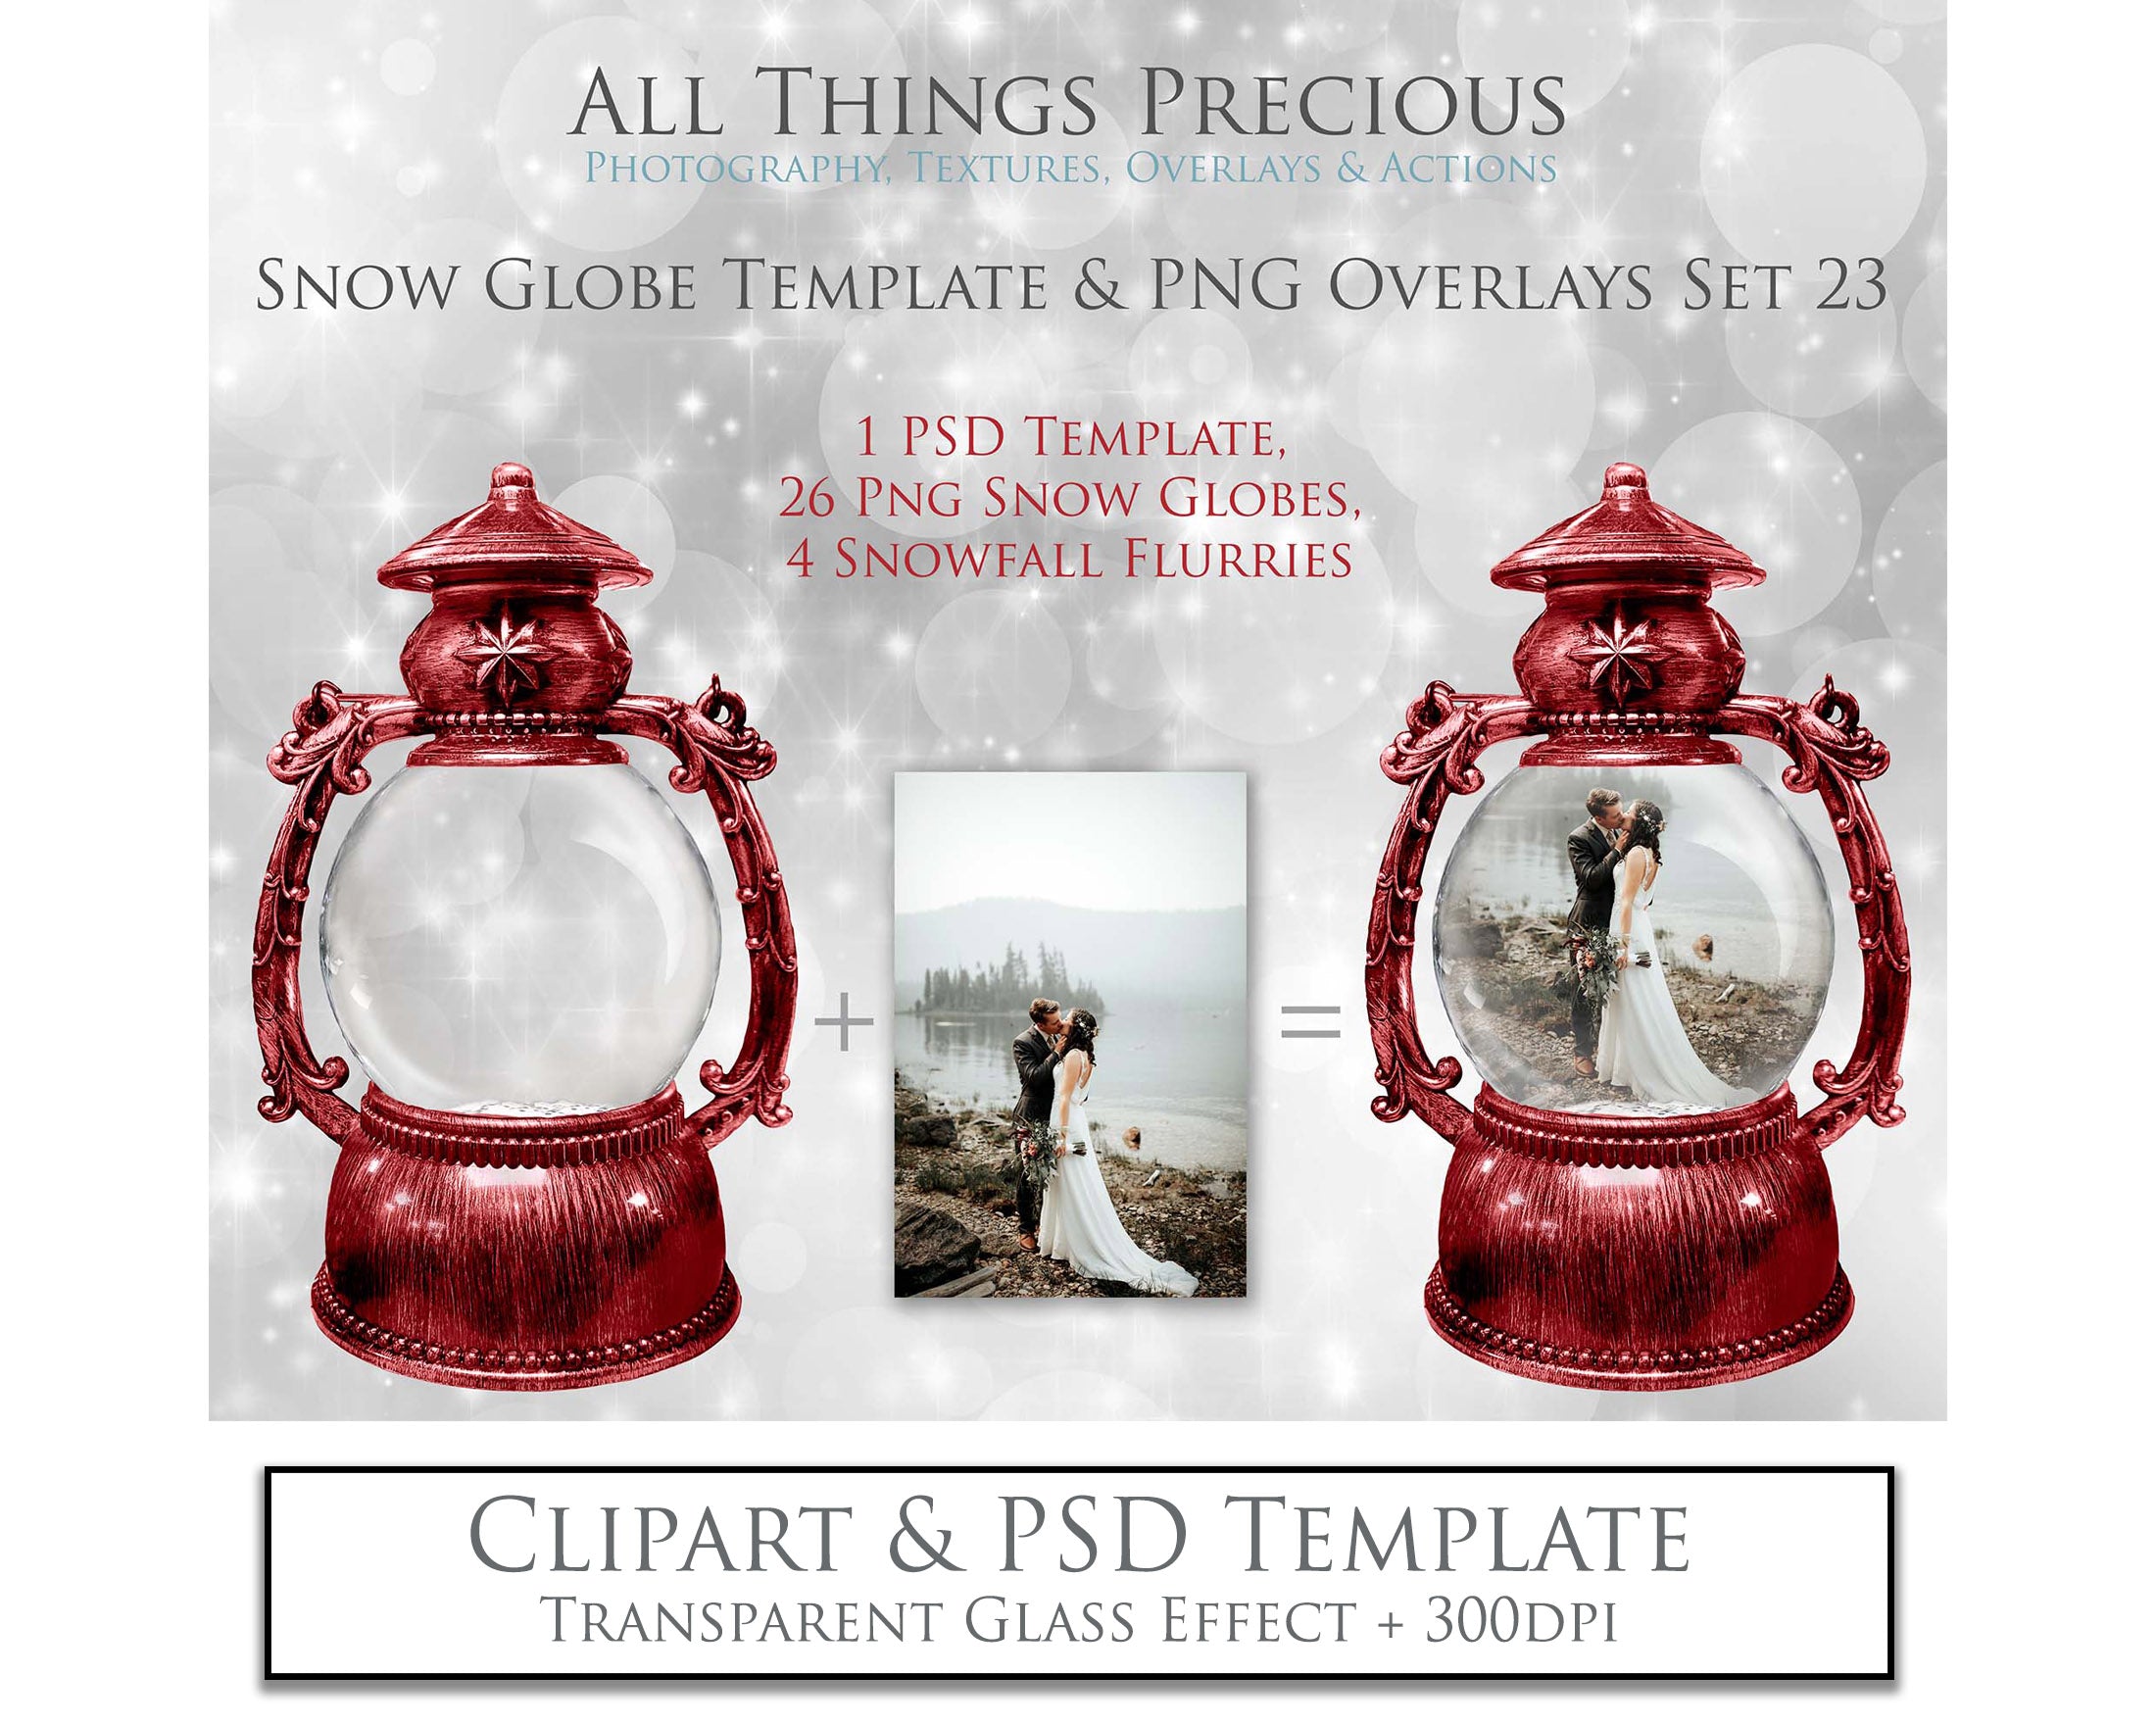 Digital Snow Globe Overlays, with snow flurries and a PSD Template included in the set. Transparent Glass Graphic Effects. Png Overlays with Photoshop Digital template file. High resolution, 300dpi. Visit the Website for more add ons, Actions, Overlays and Christmas Theme Products at ATP Textures.